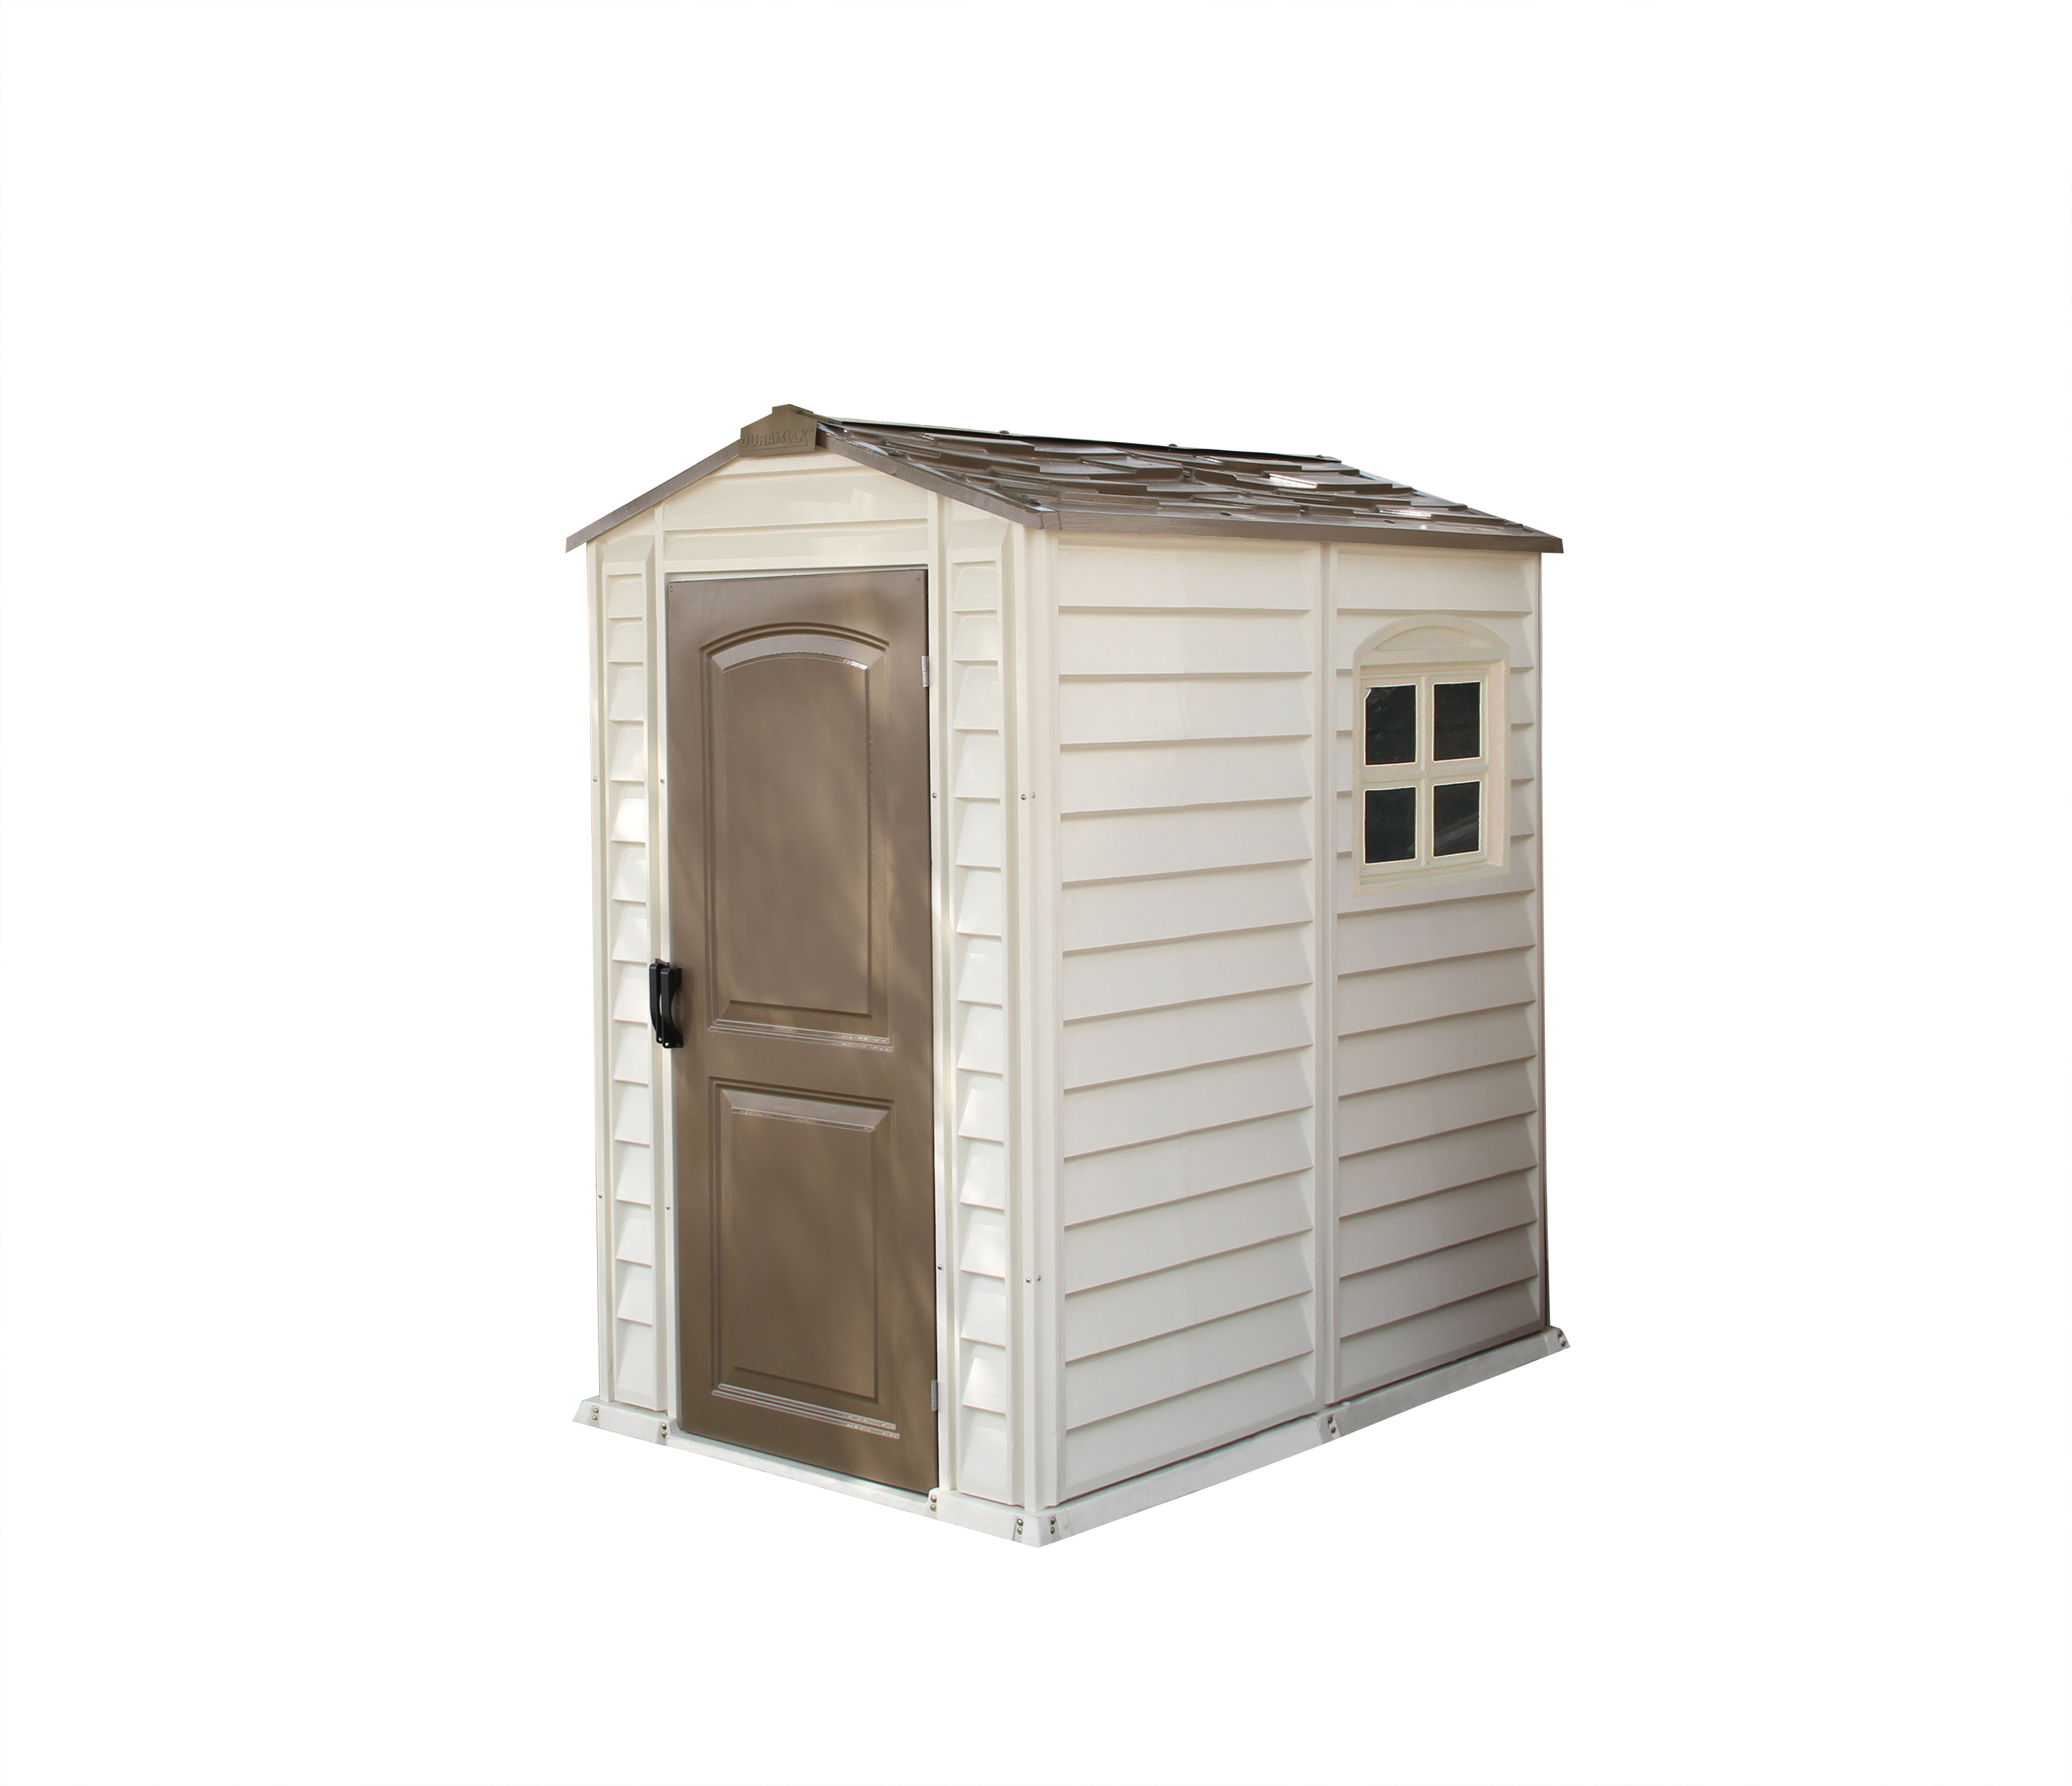 BillyOh Daily Apex Plastic Shed - Vinyl Clad Plastic Shed with floor